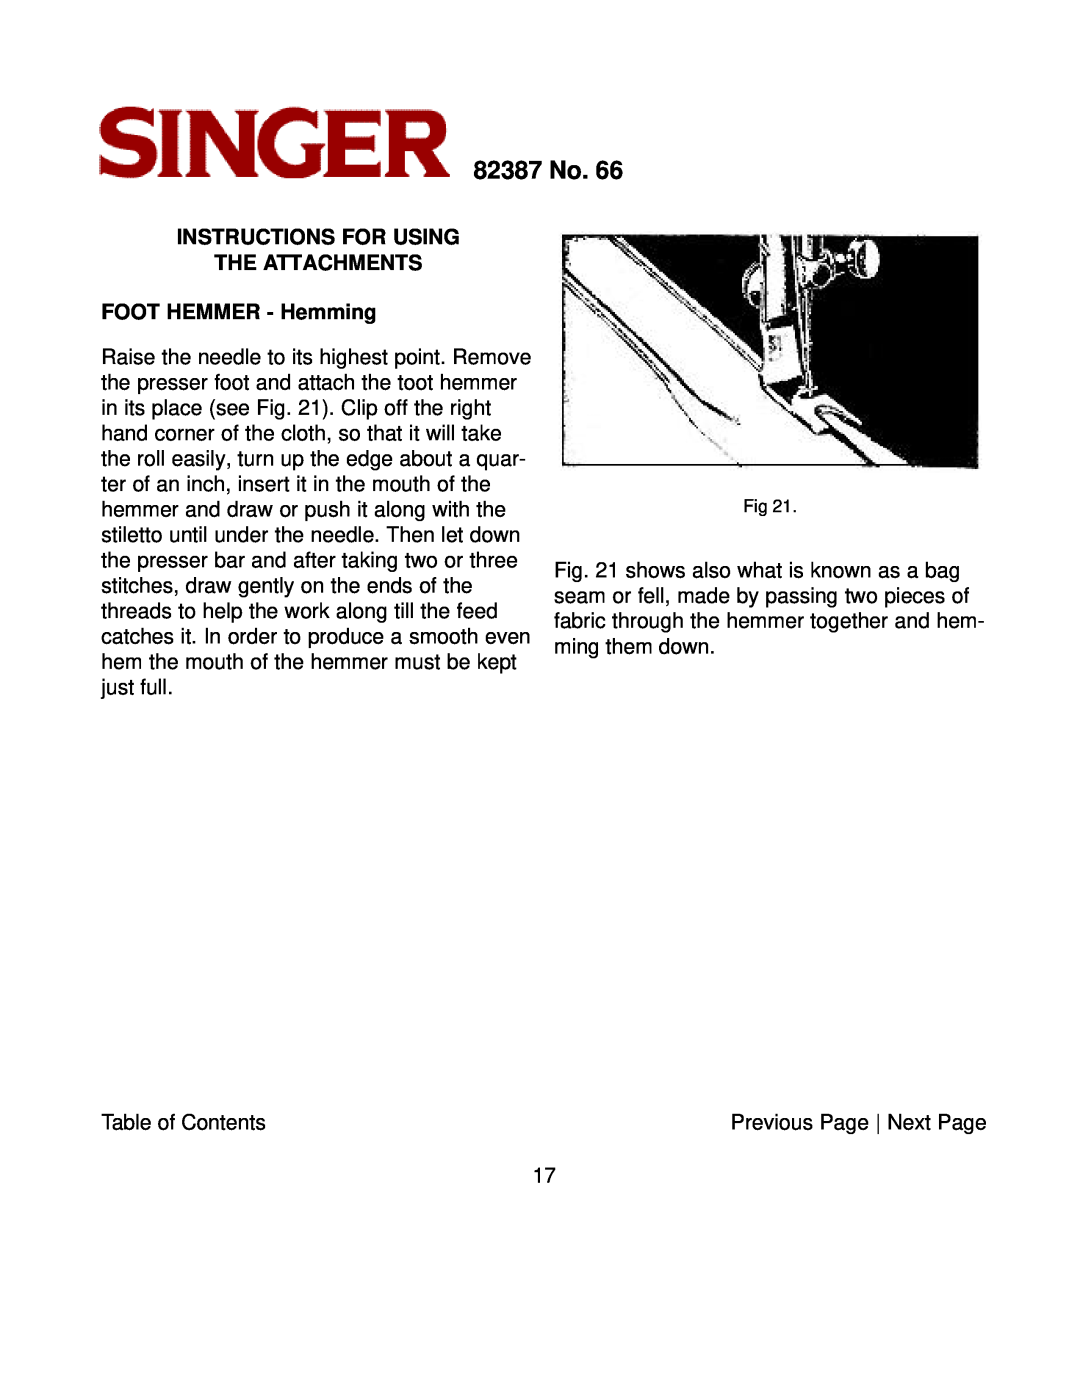 Singer instruction manual INSTRUCTIONS FOR USING THE ATTACHMENTS FOOT HEMMER - Hemming, 82387 No 